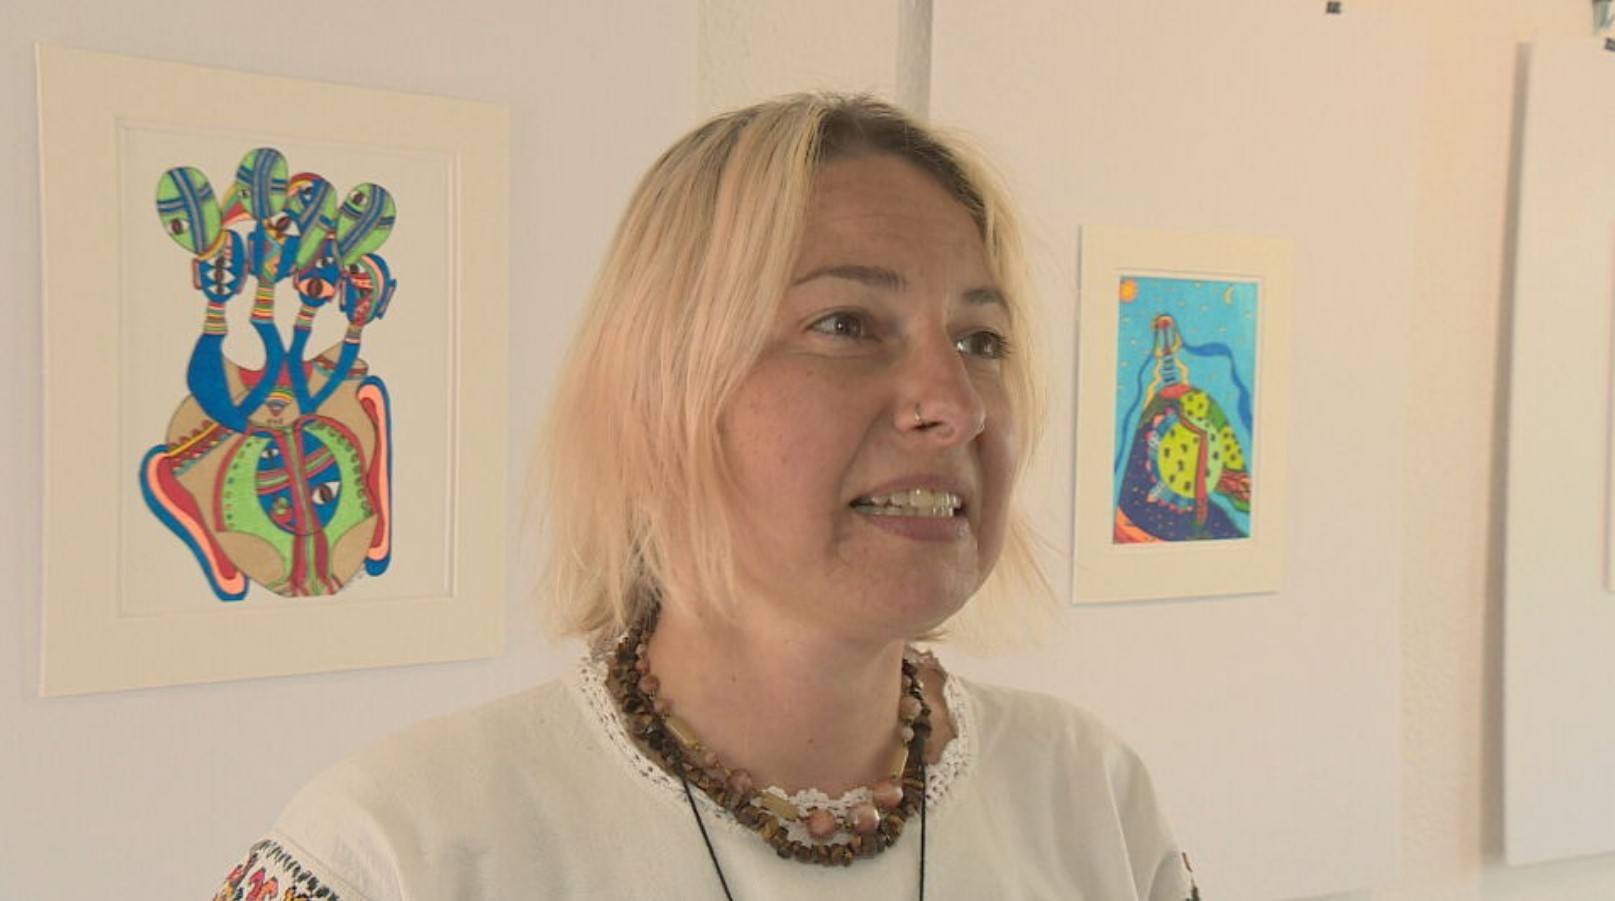 Artist Taryna Kvltka said the exhibition represents 'the connection between past, present and future'